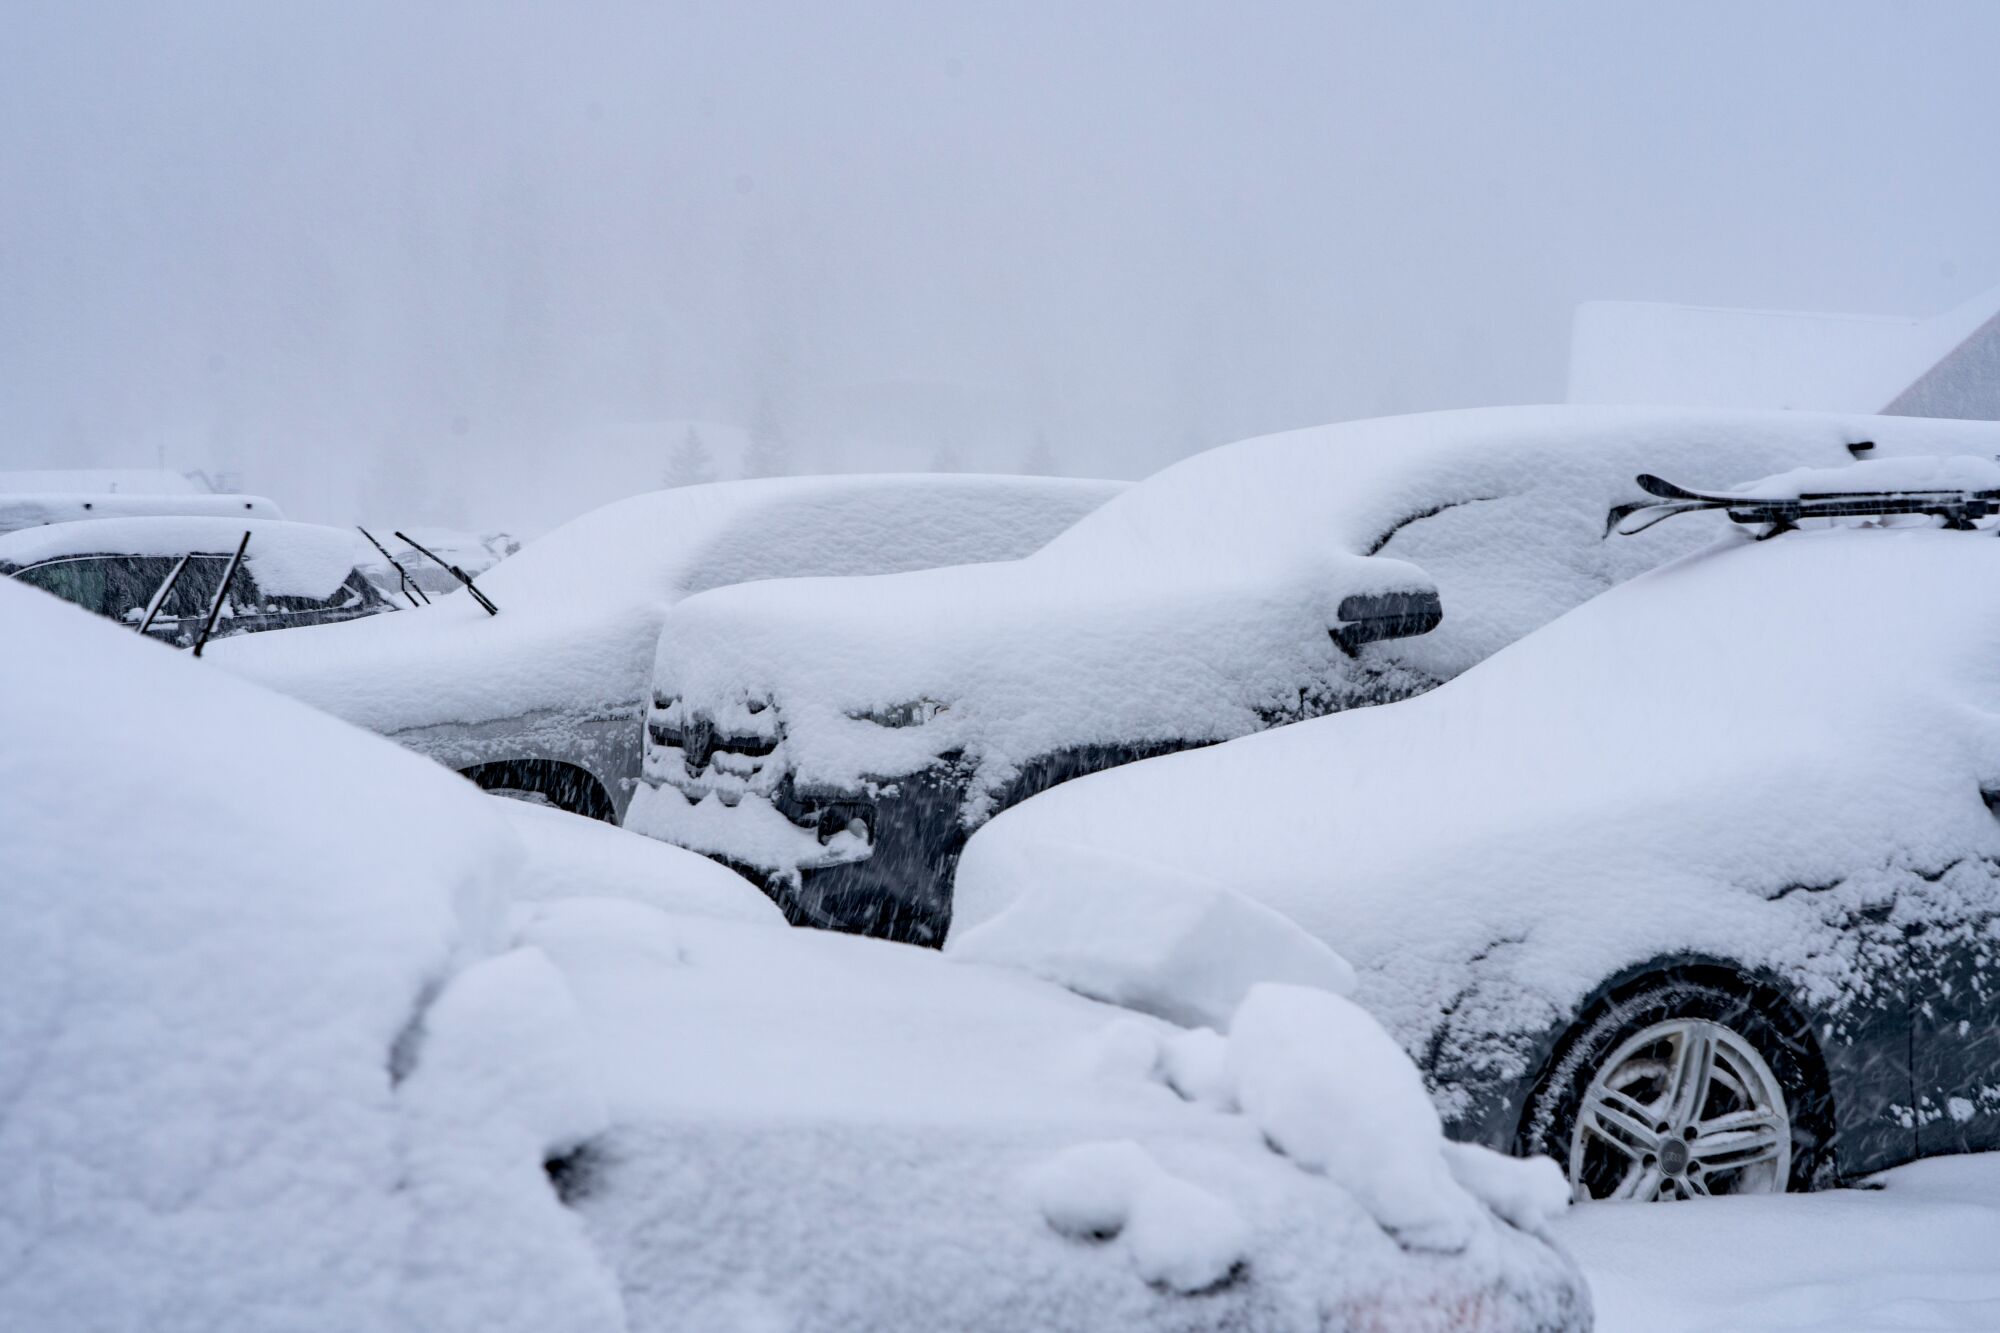 A line of cars covered in heaps of snow. The backdrop is gray and misty.